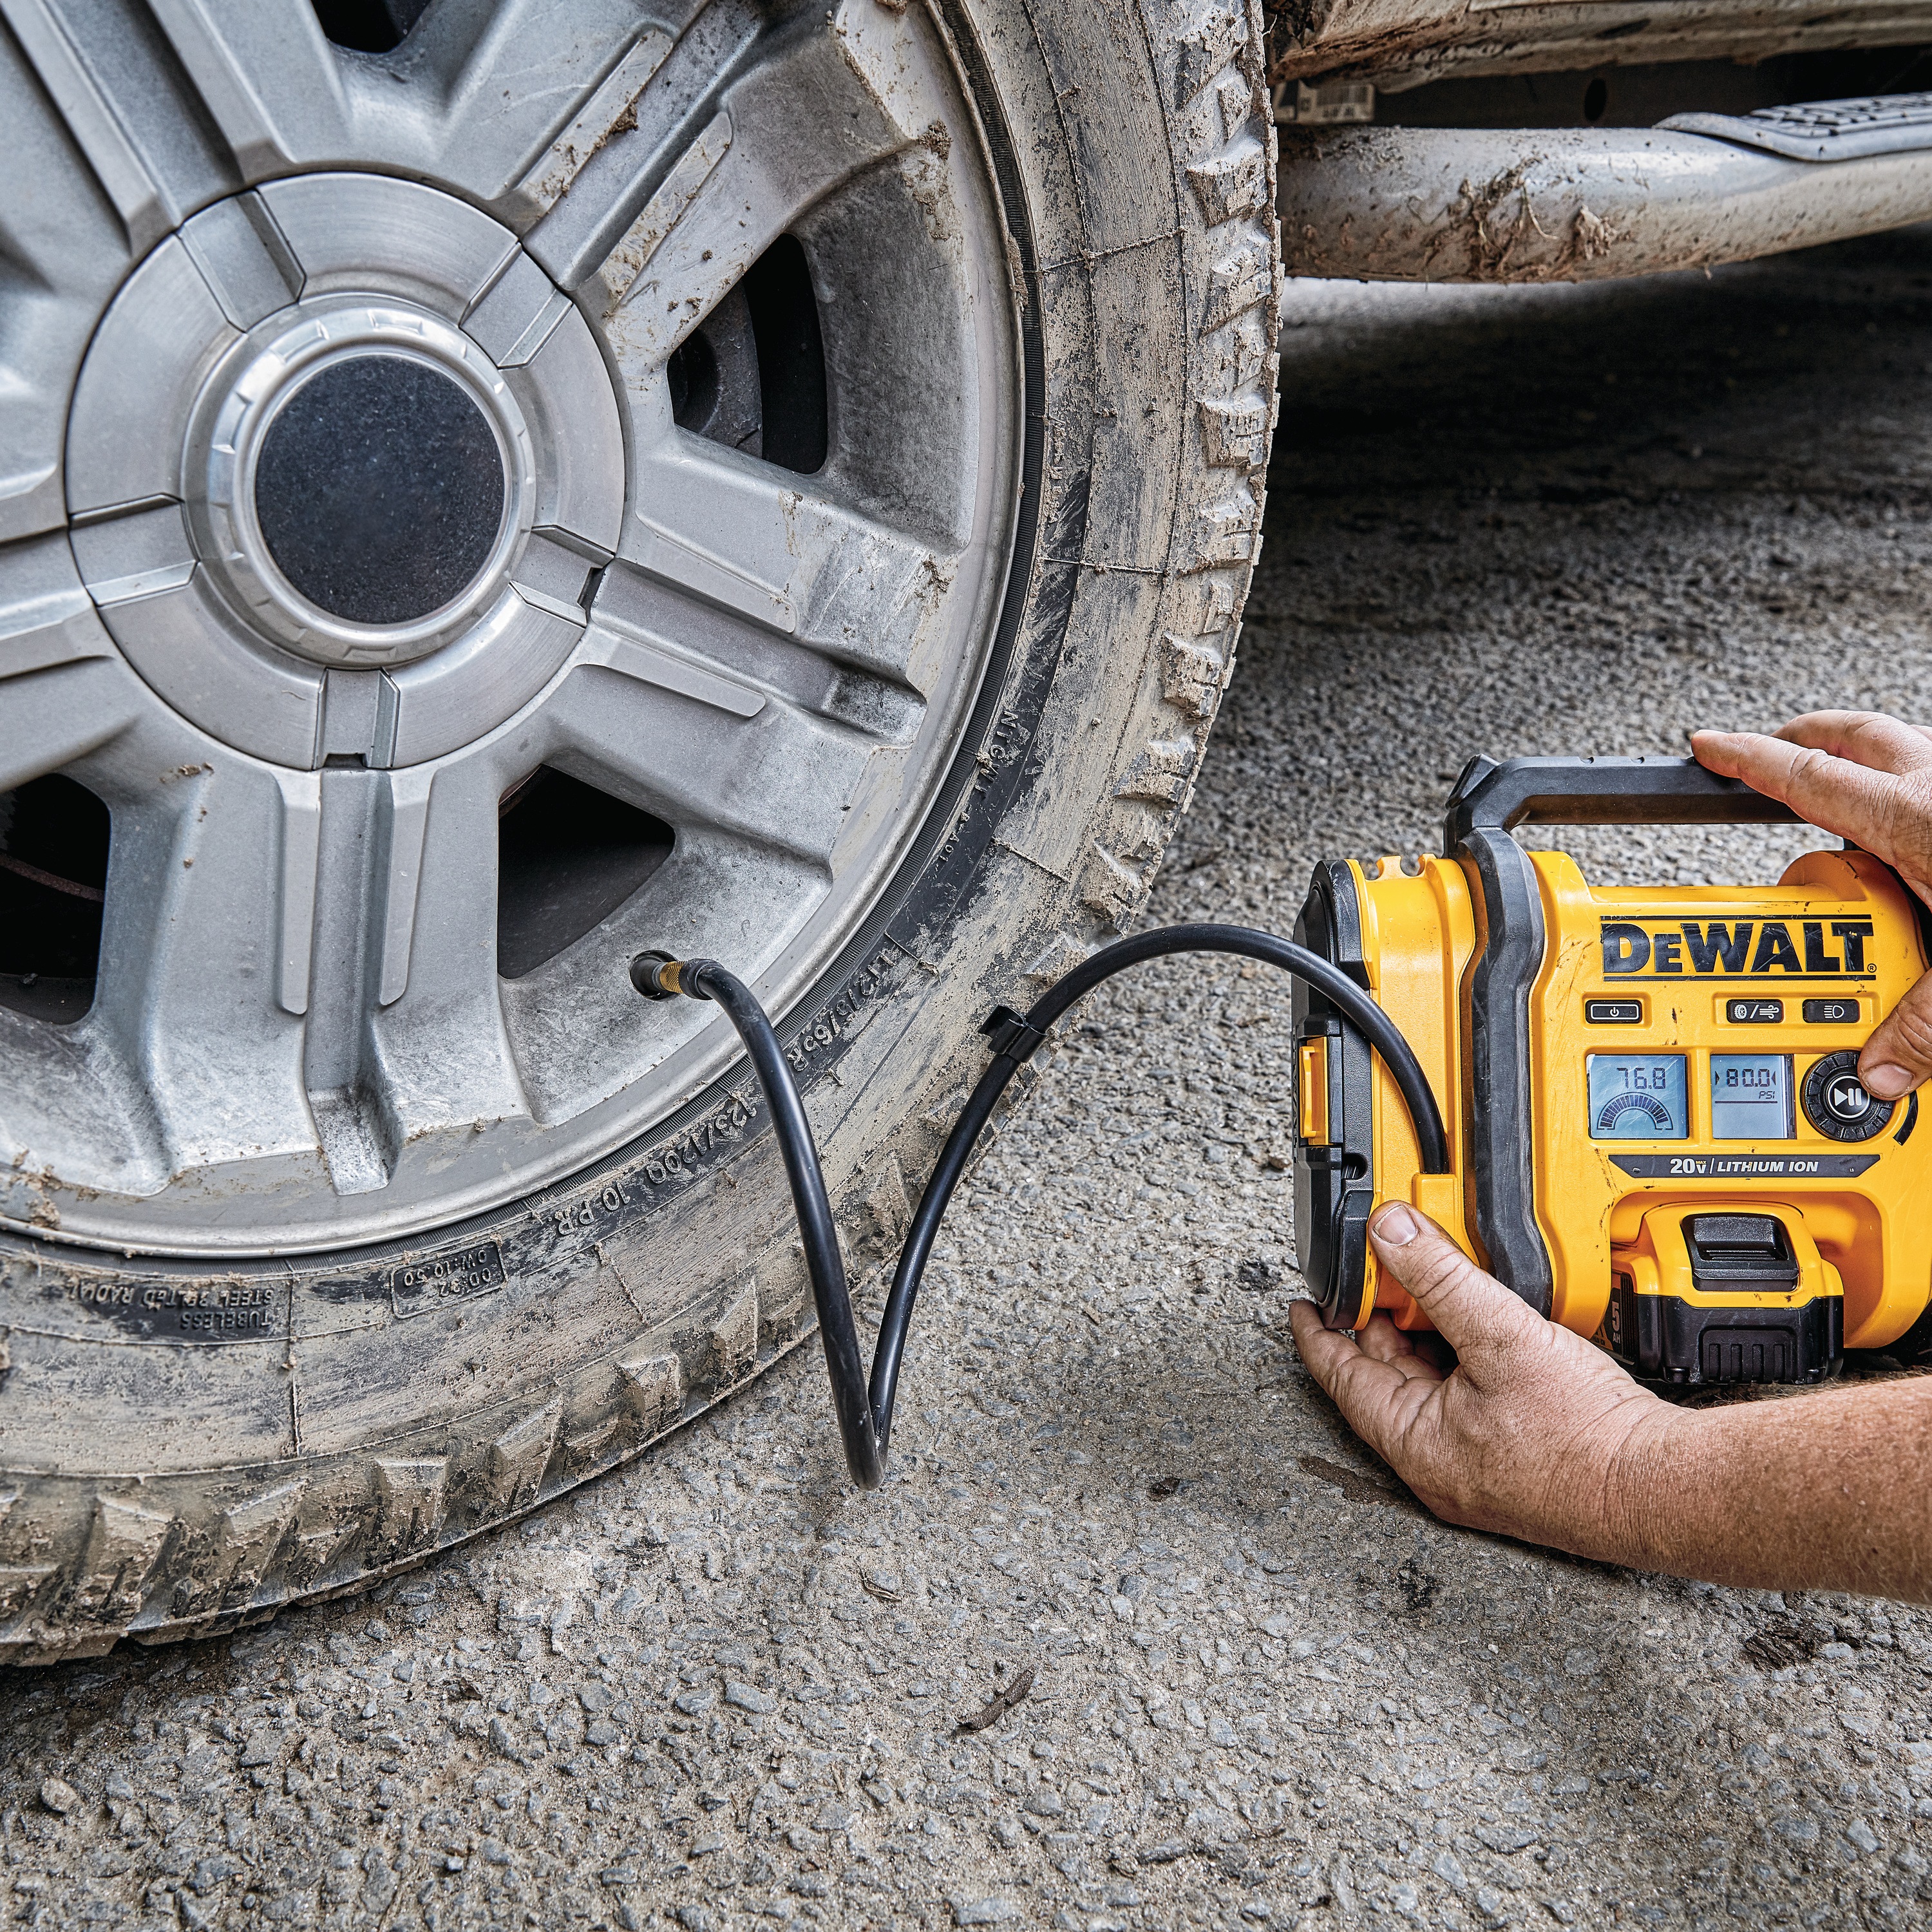 Corded/Cordless Air Inflator being used by a person to inflate a tire